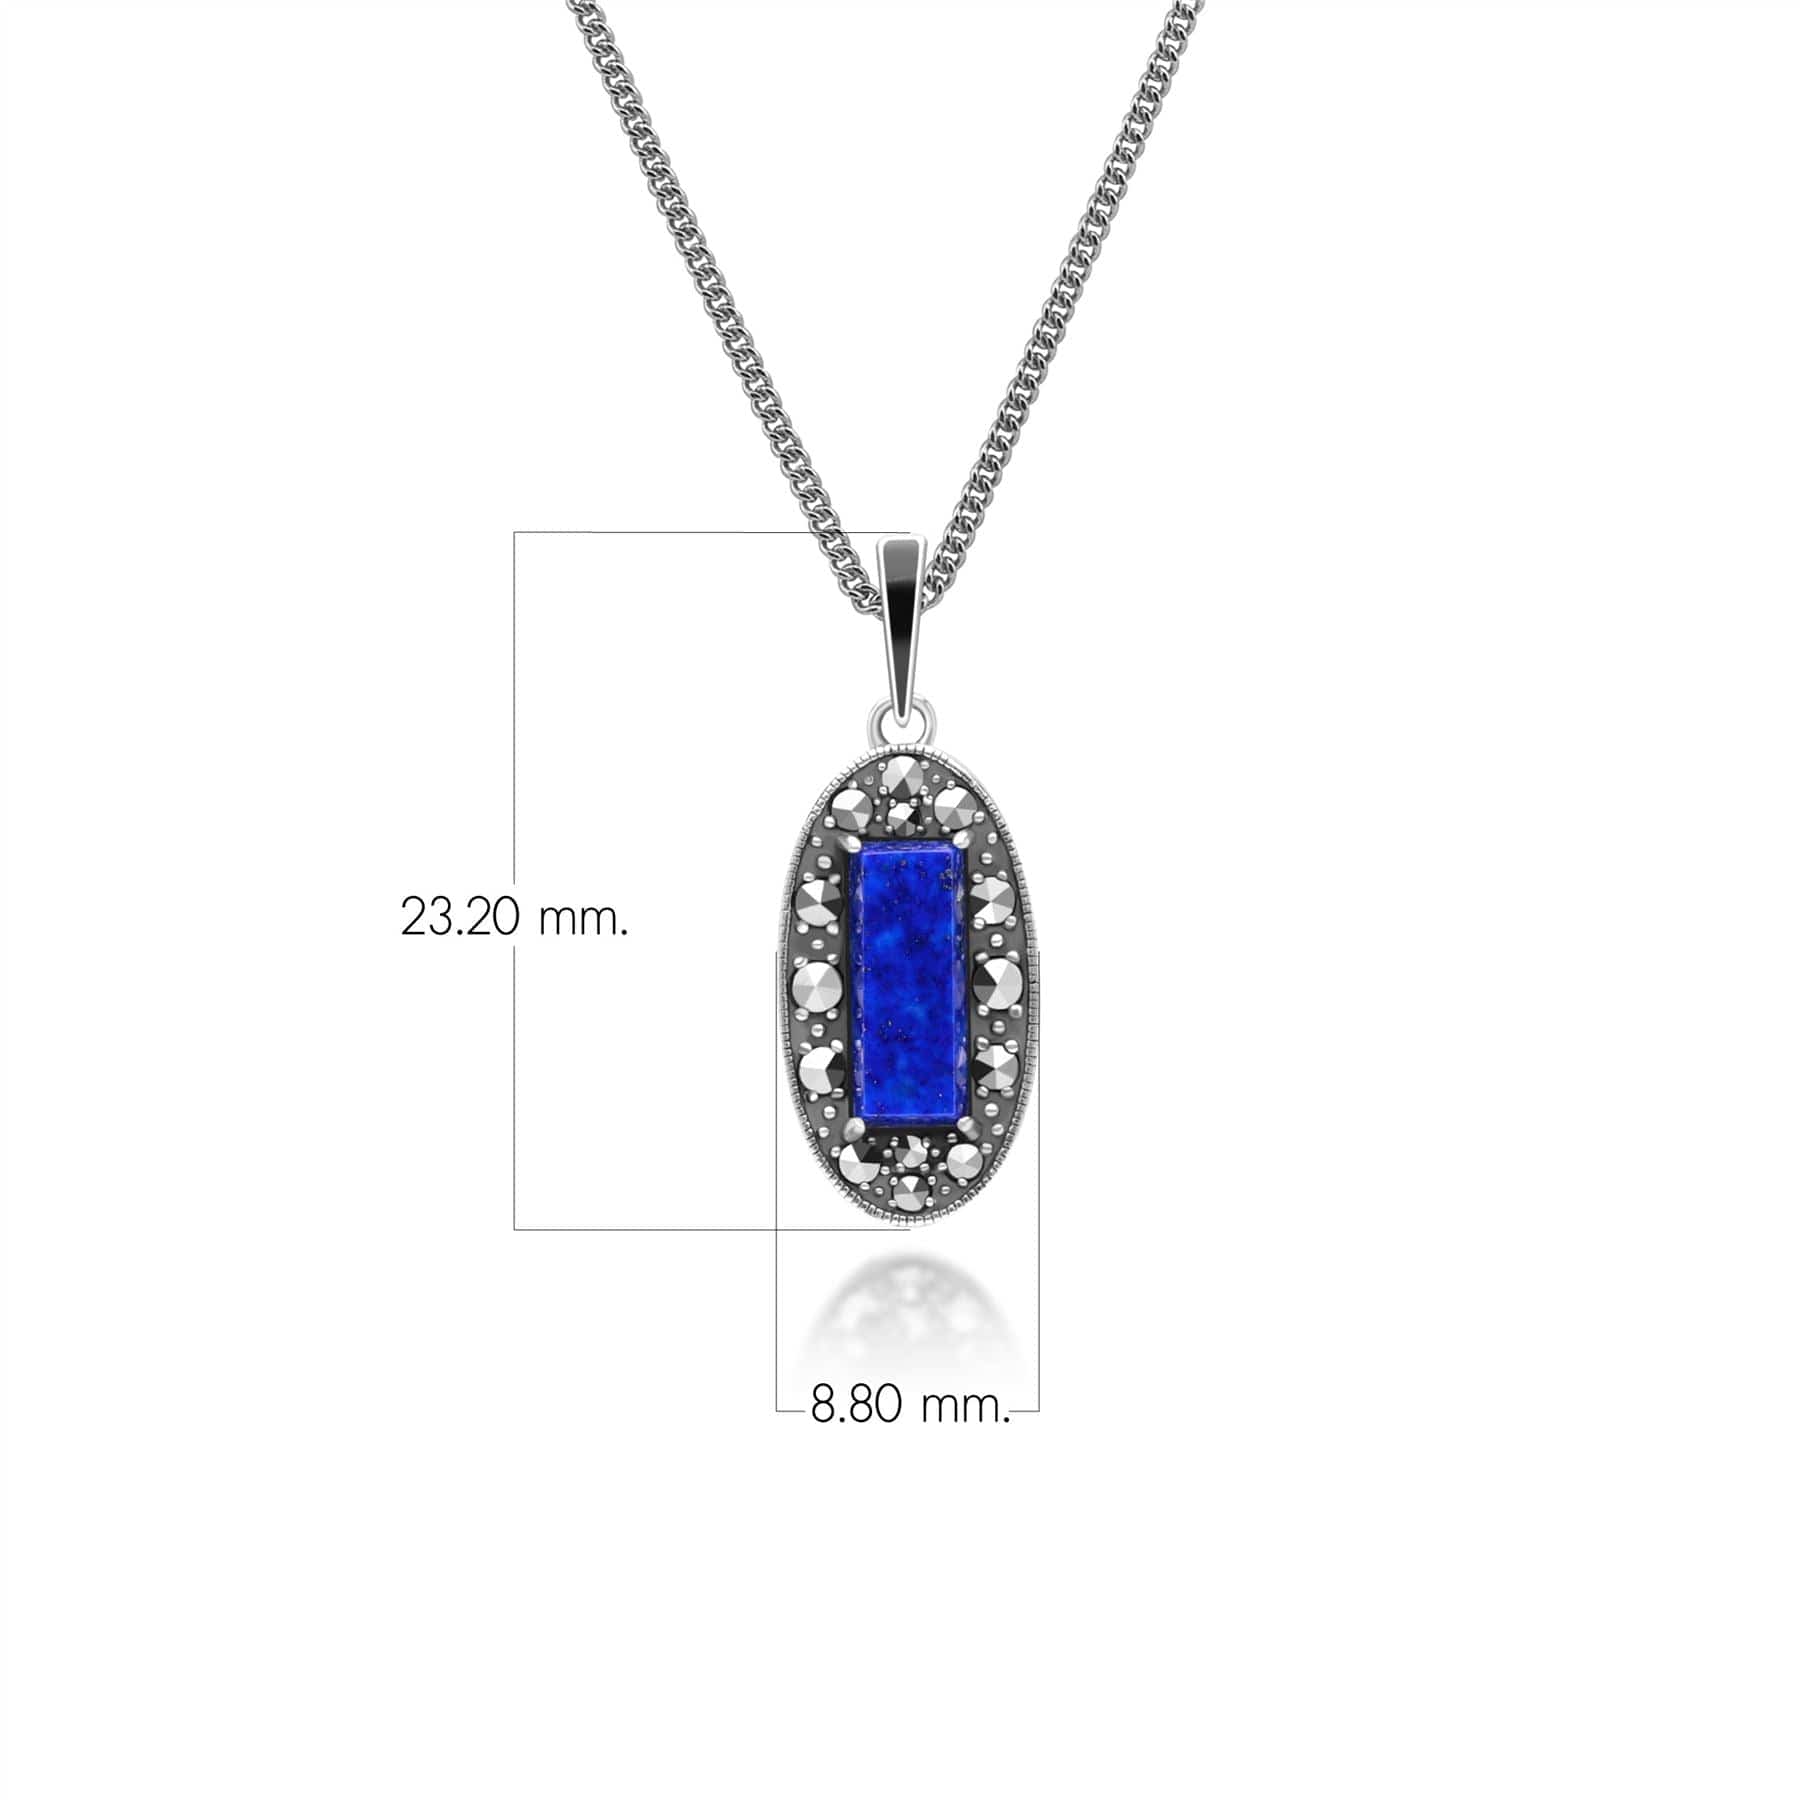 Art Deco Style Oval Lapis Lazuli, Marcasite and Black Enamel Pendant Necklace in Sterling Silver 214P334401925 Dimensions